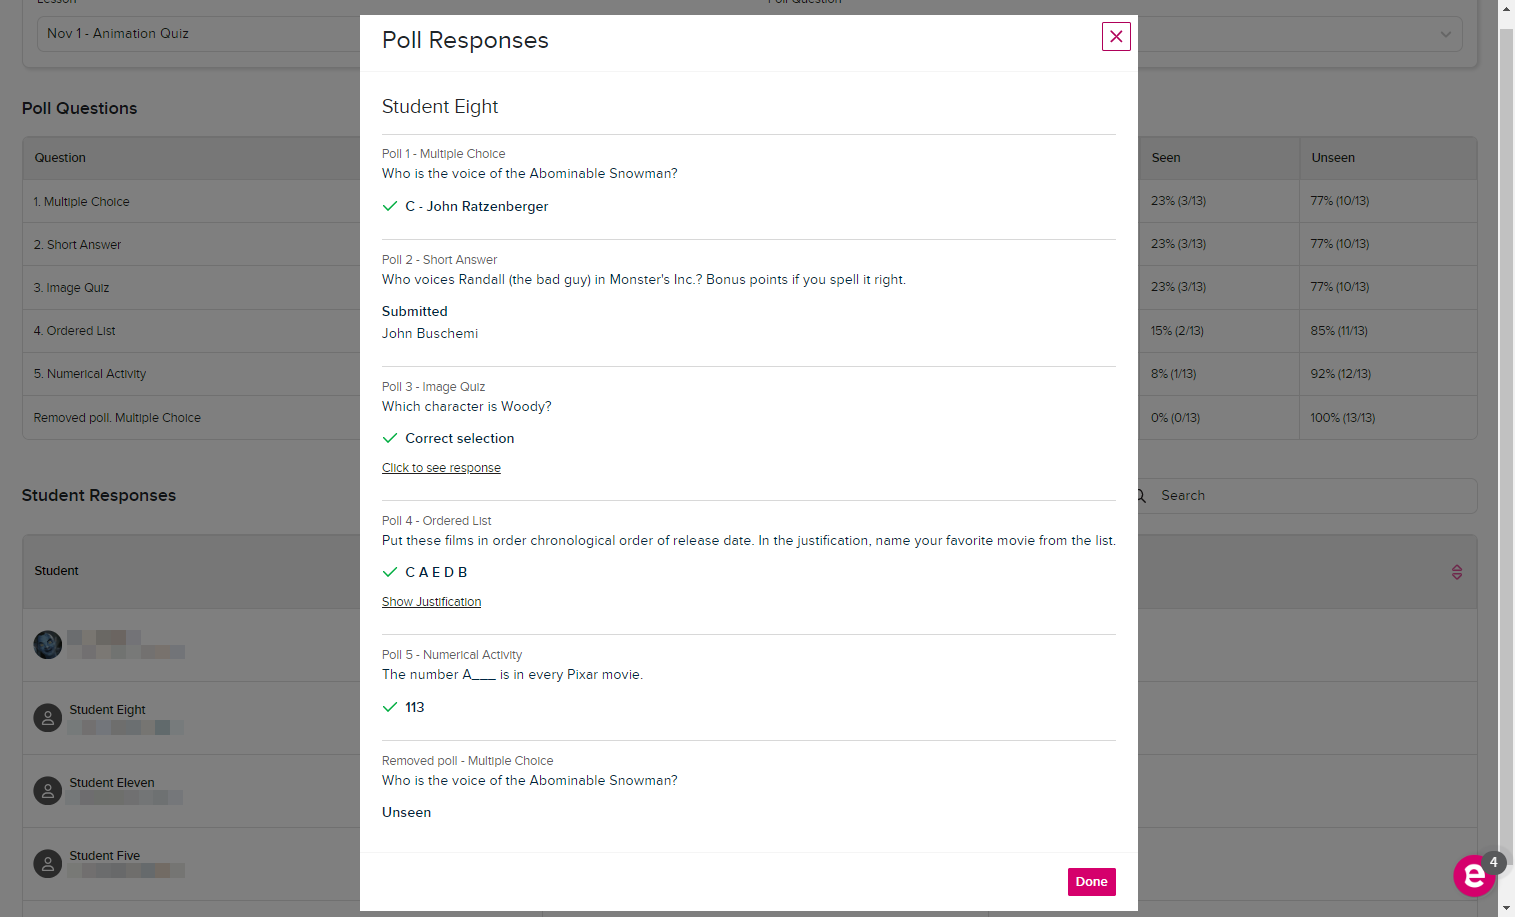 Popup modal showing a selected student's responses to all polls in the media as described